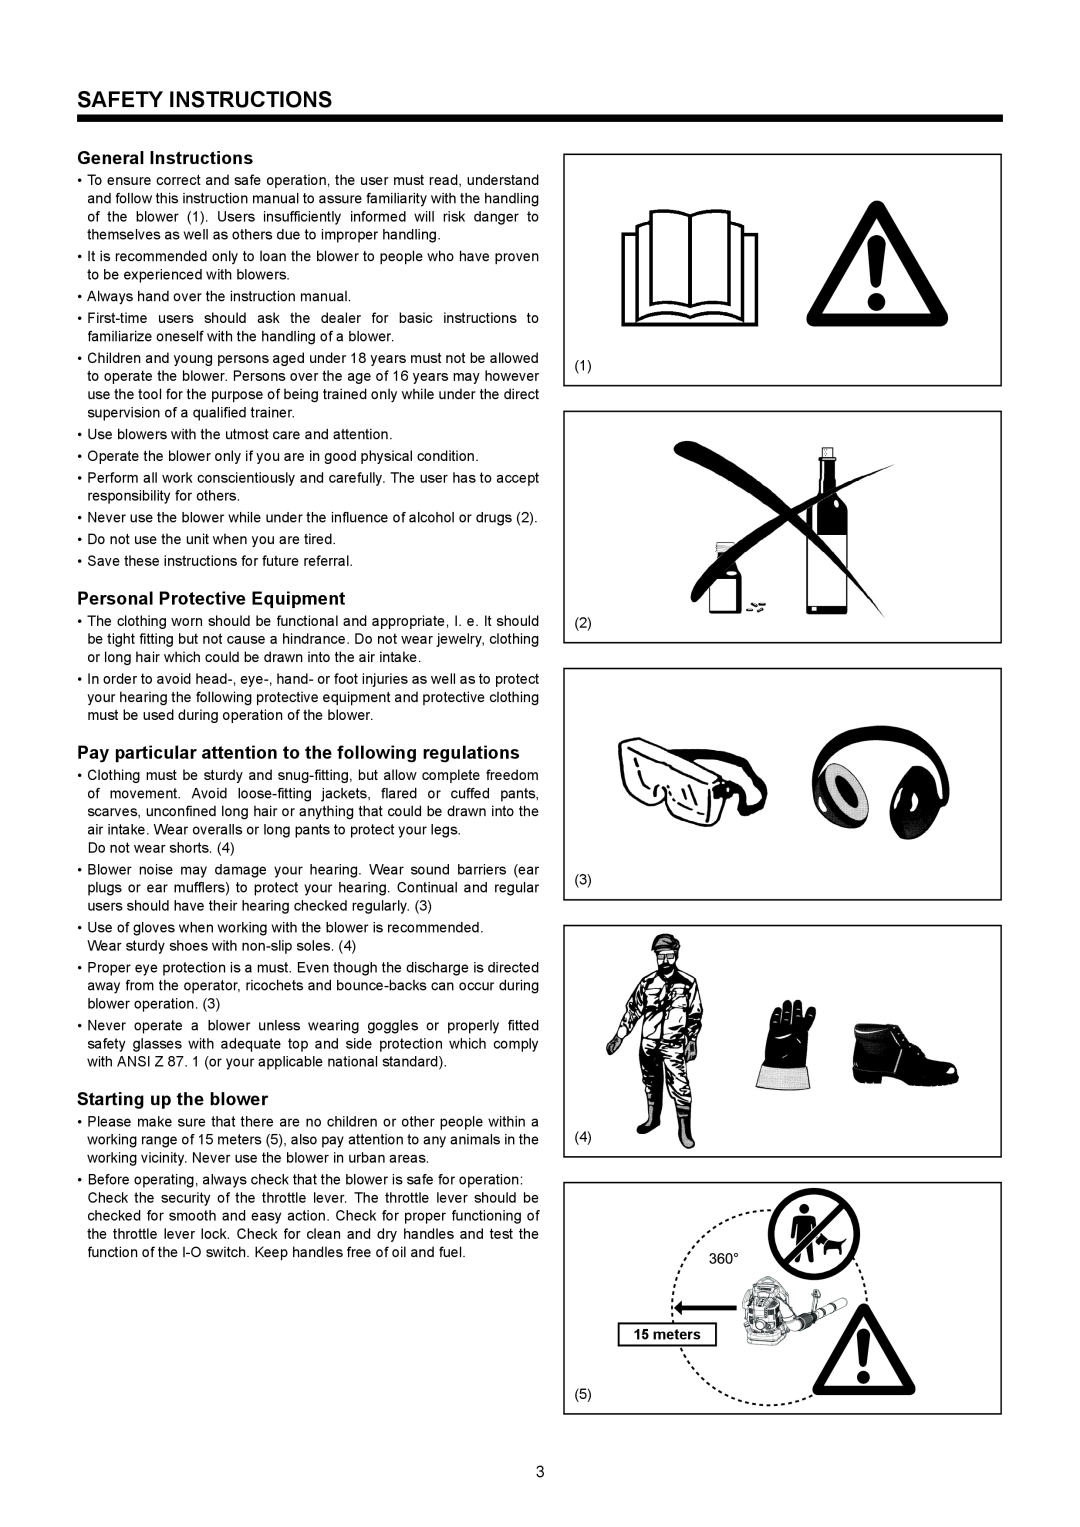 Makita BBX7600CA Safety Instructions, General Instructions, Personal Protective Equipment, Starting up the blower, meters 